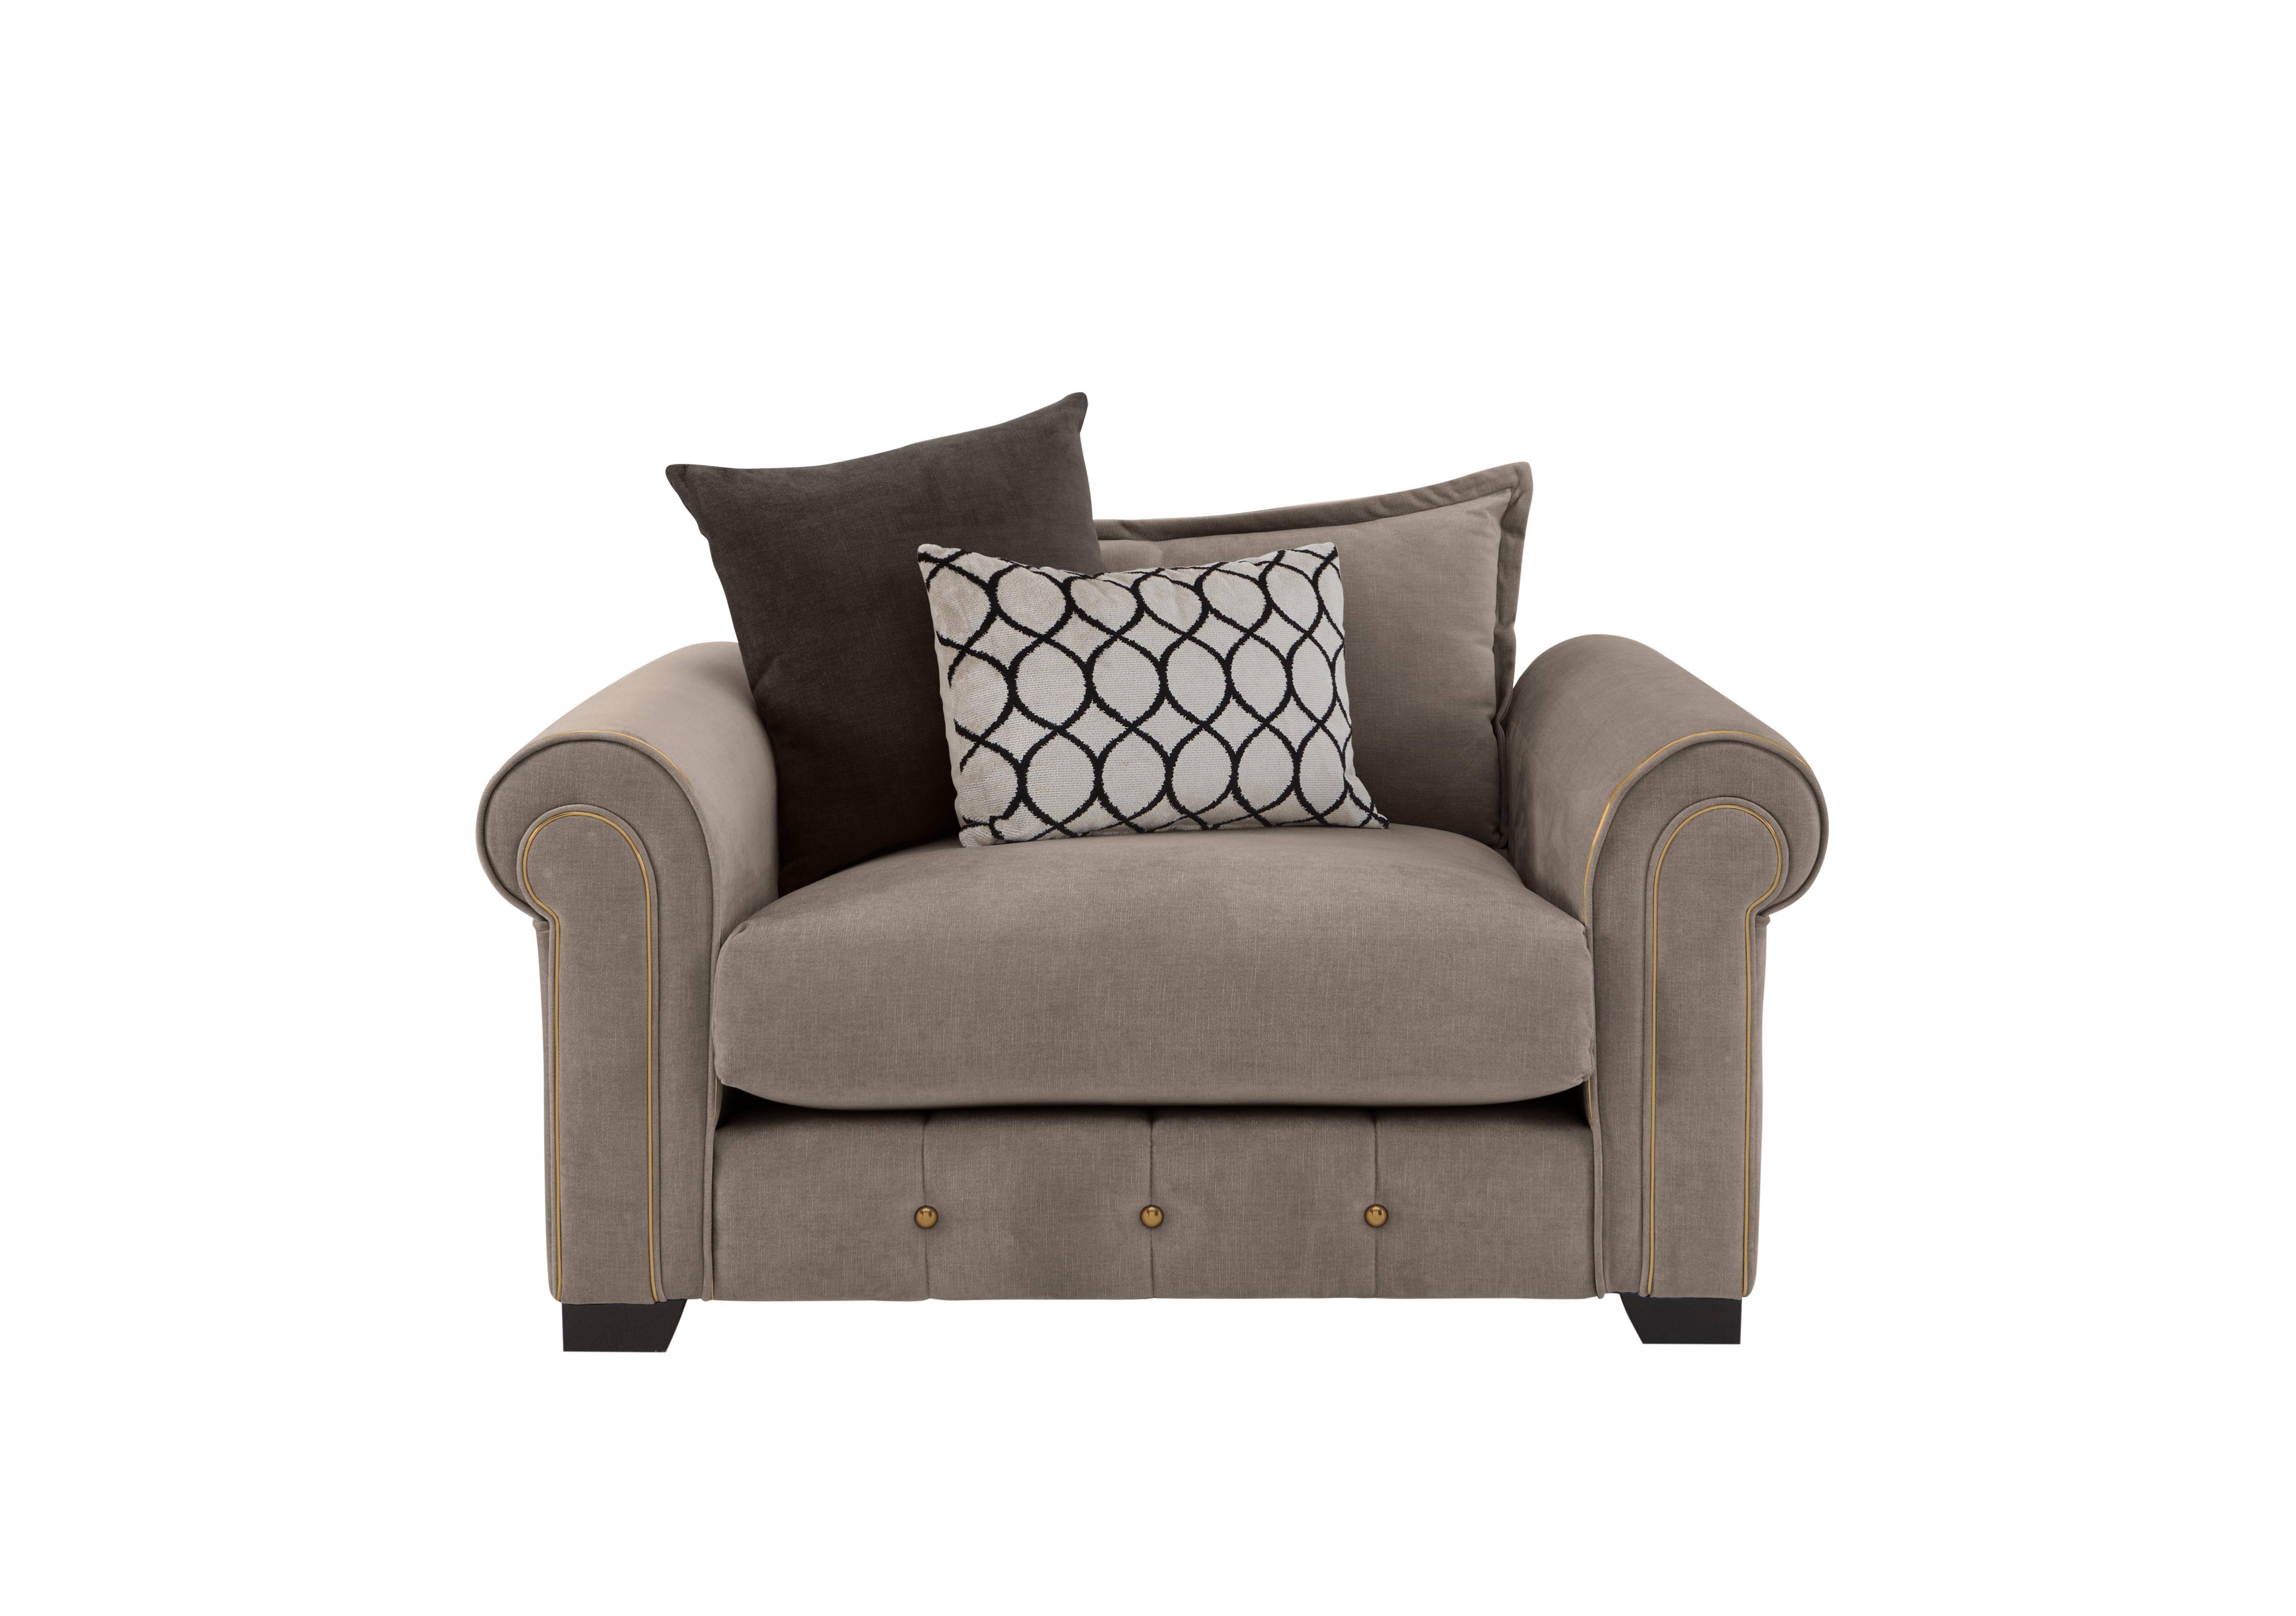 Sumptuous Fabric Snuggler Chair in Chamonix Wicker Dk/Gold on Furniture Village